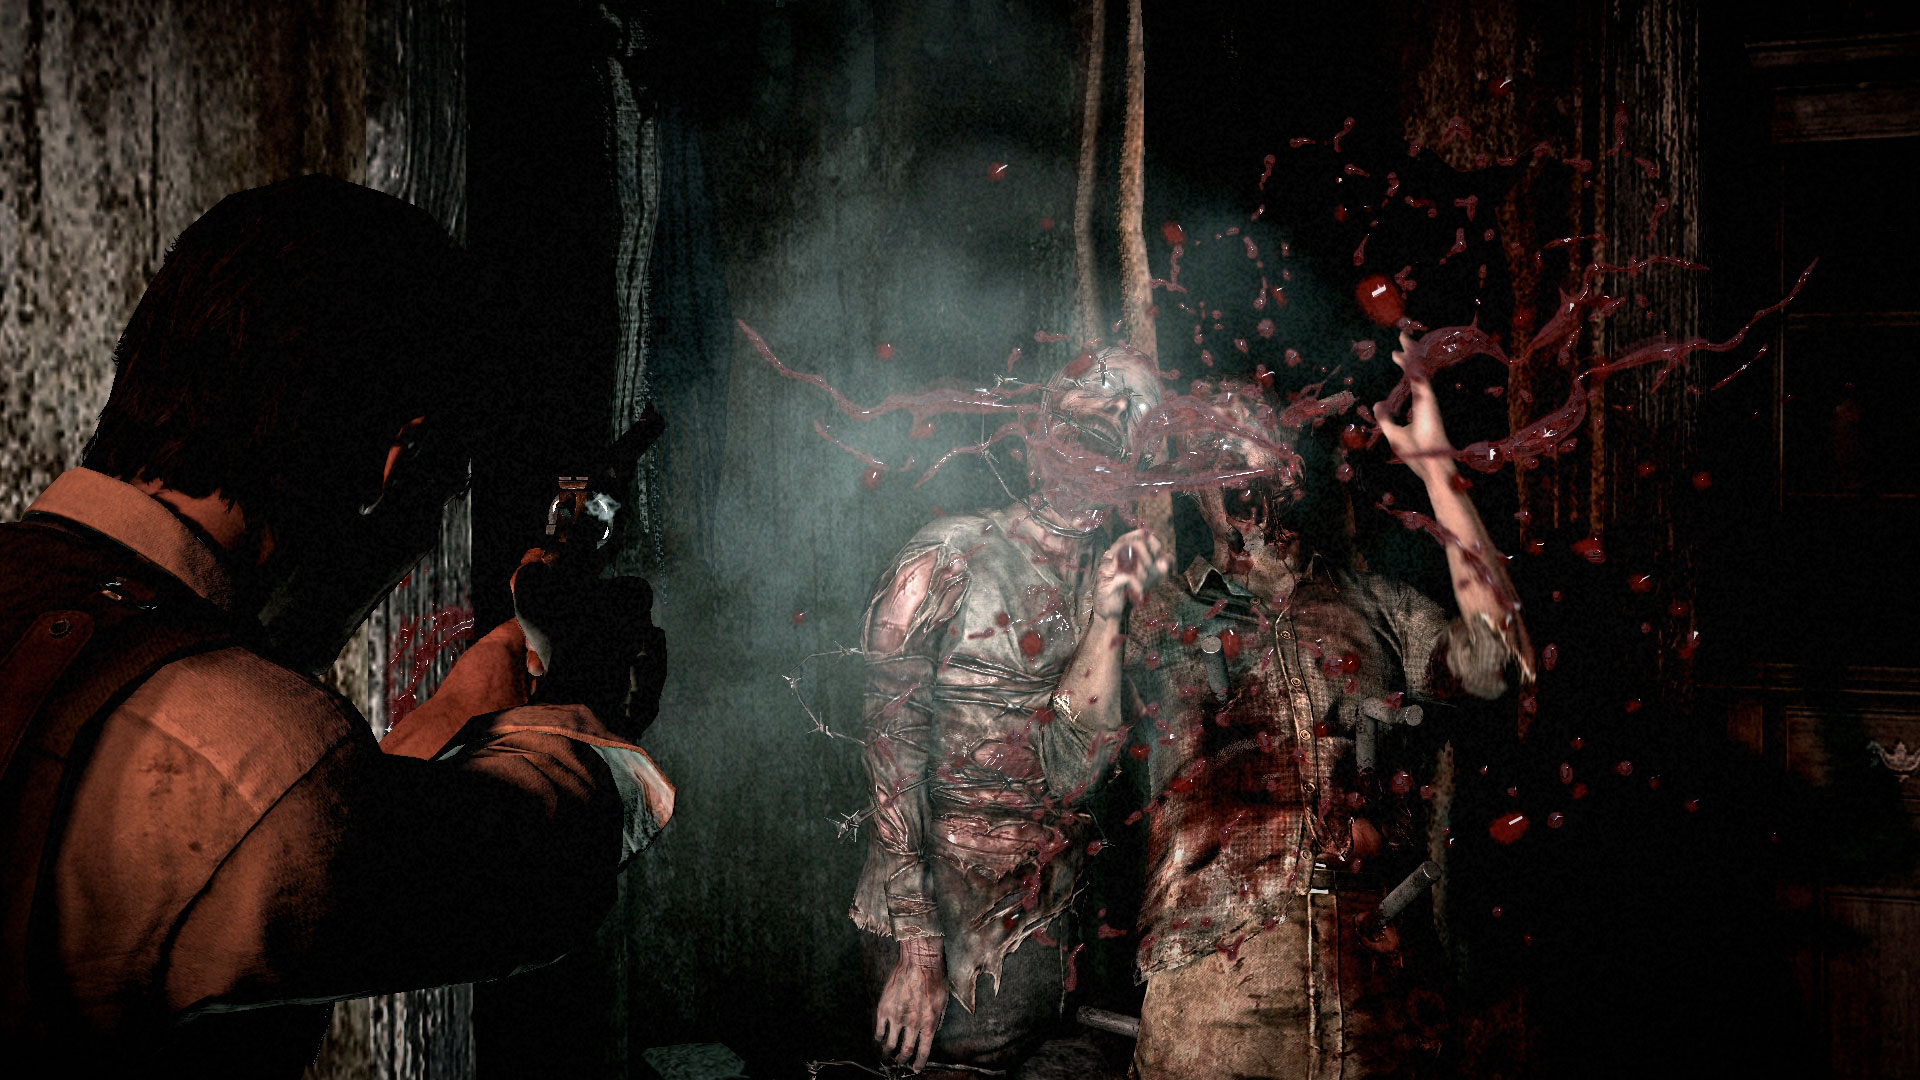 video game, the evil within